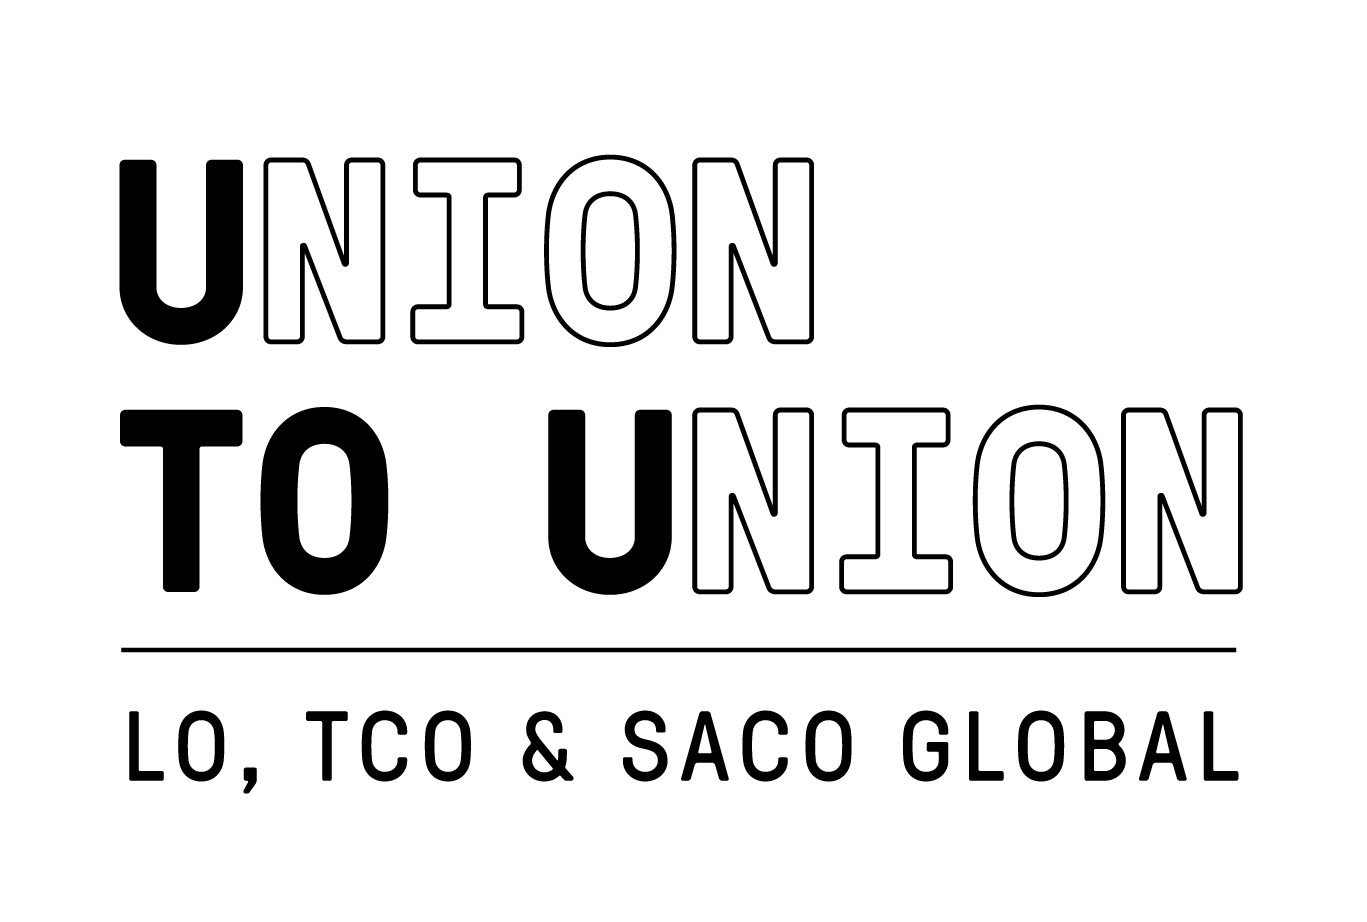 Logotyp Union to Union, png-format